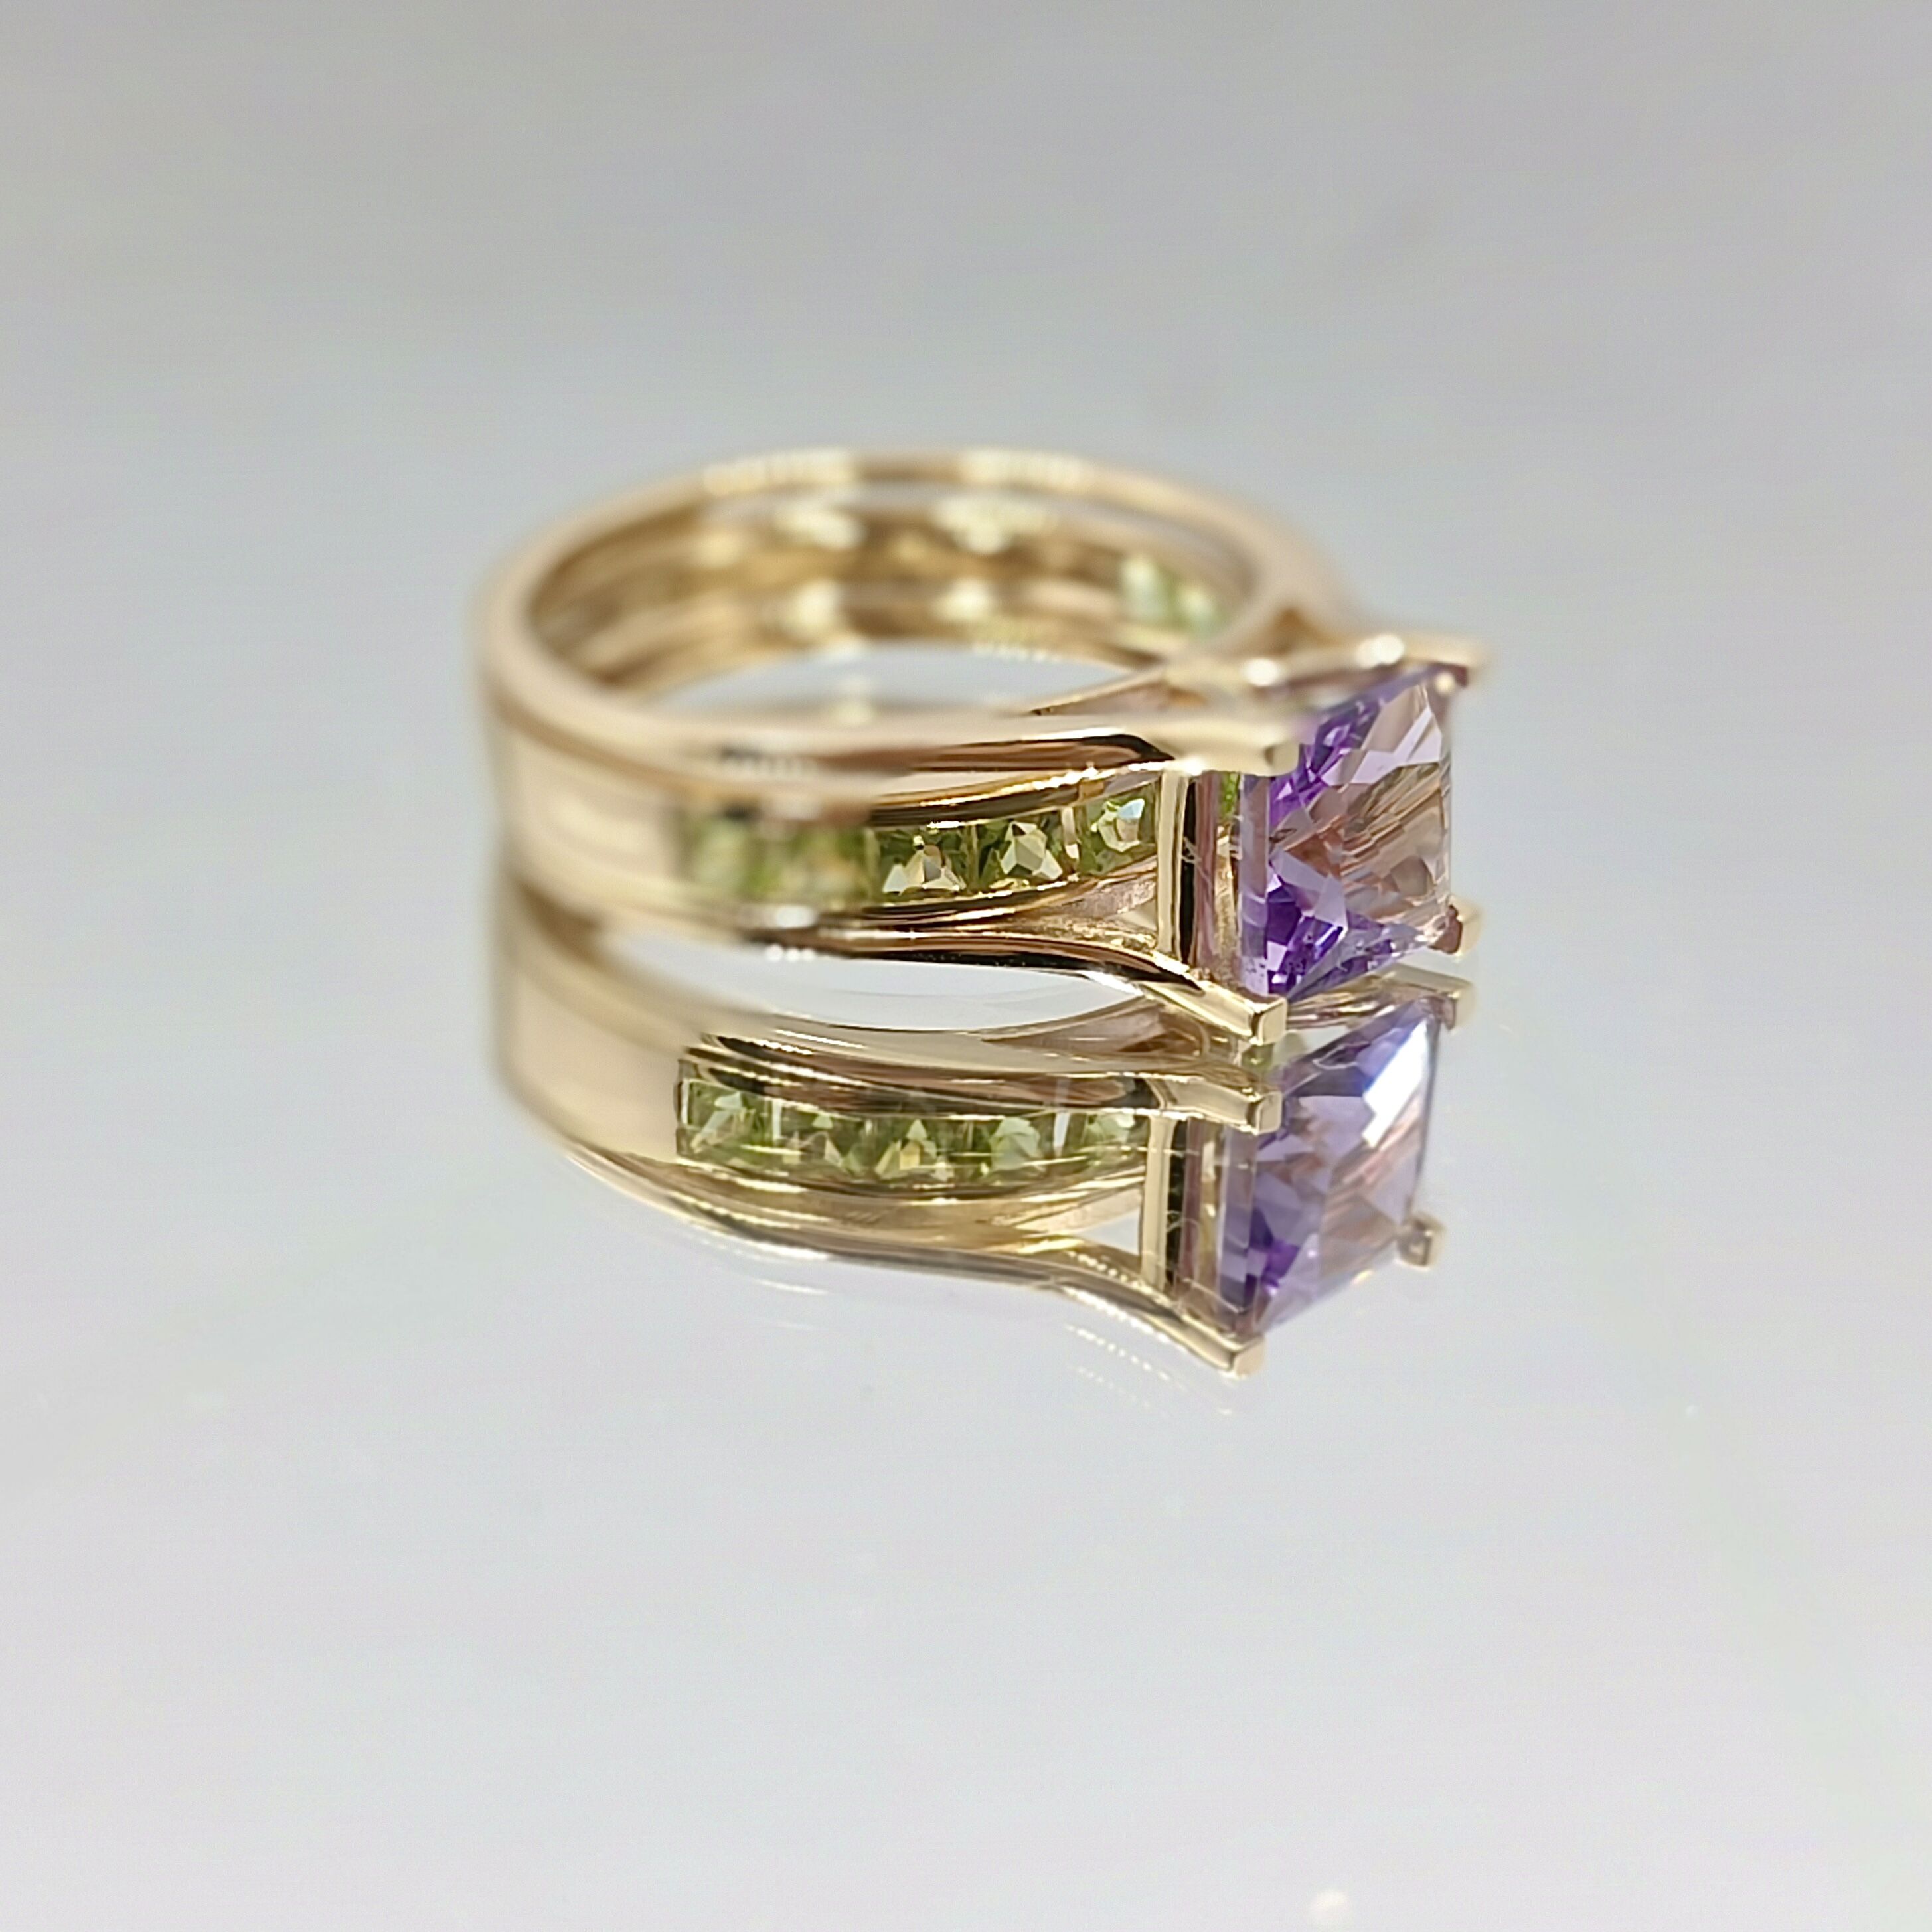 14K Solid Gold Gemstones Rings Customization Wedding Ring Set with Peridot and Amethyst-4